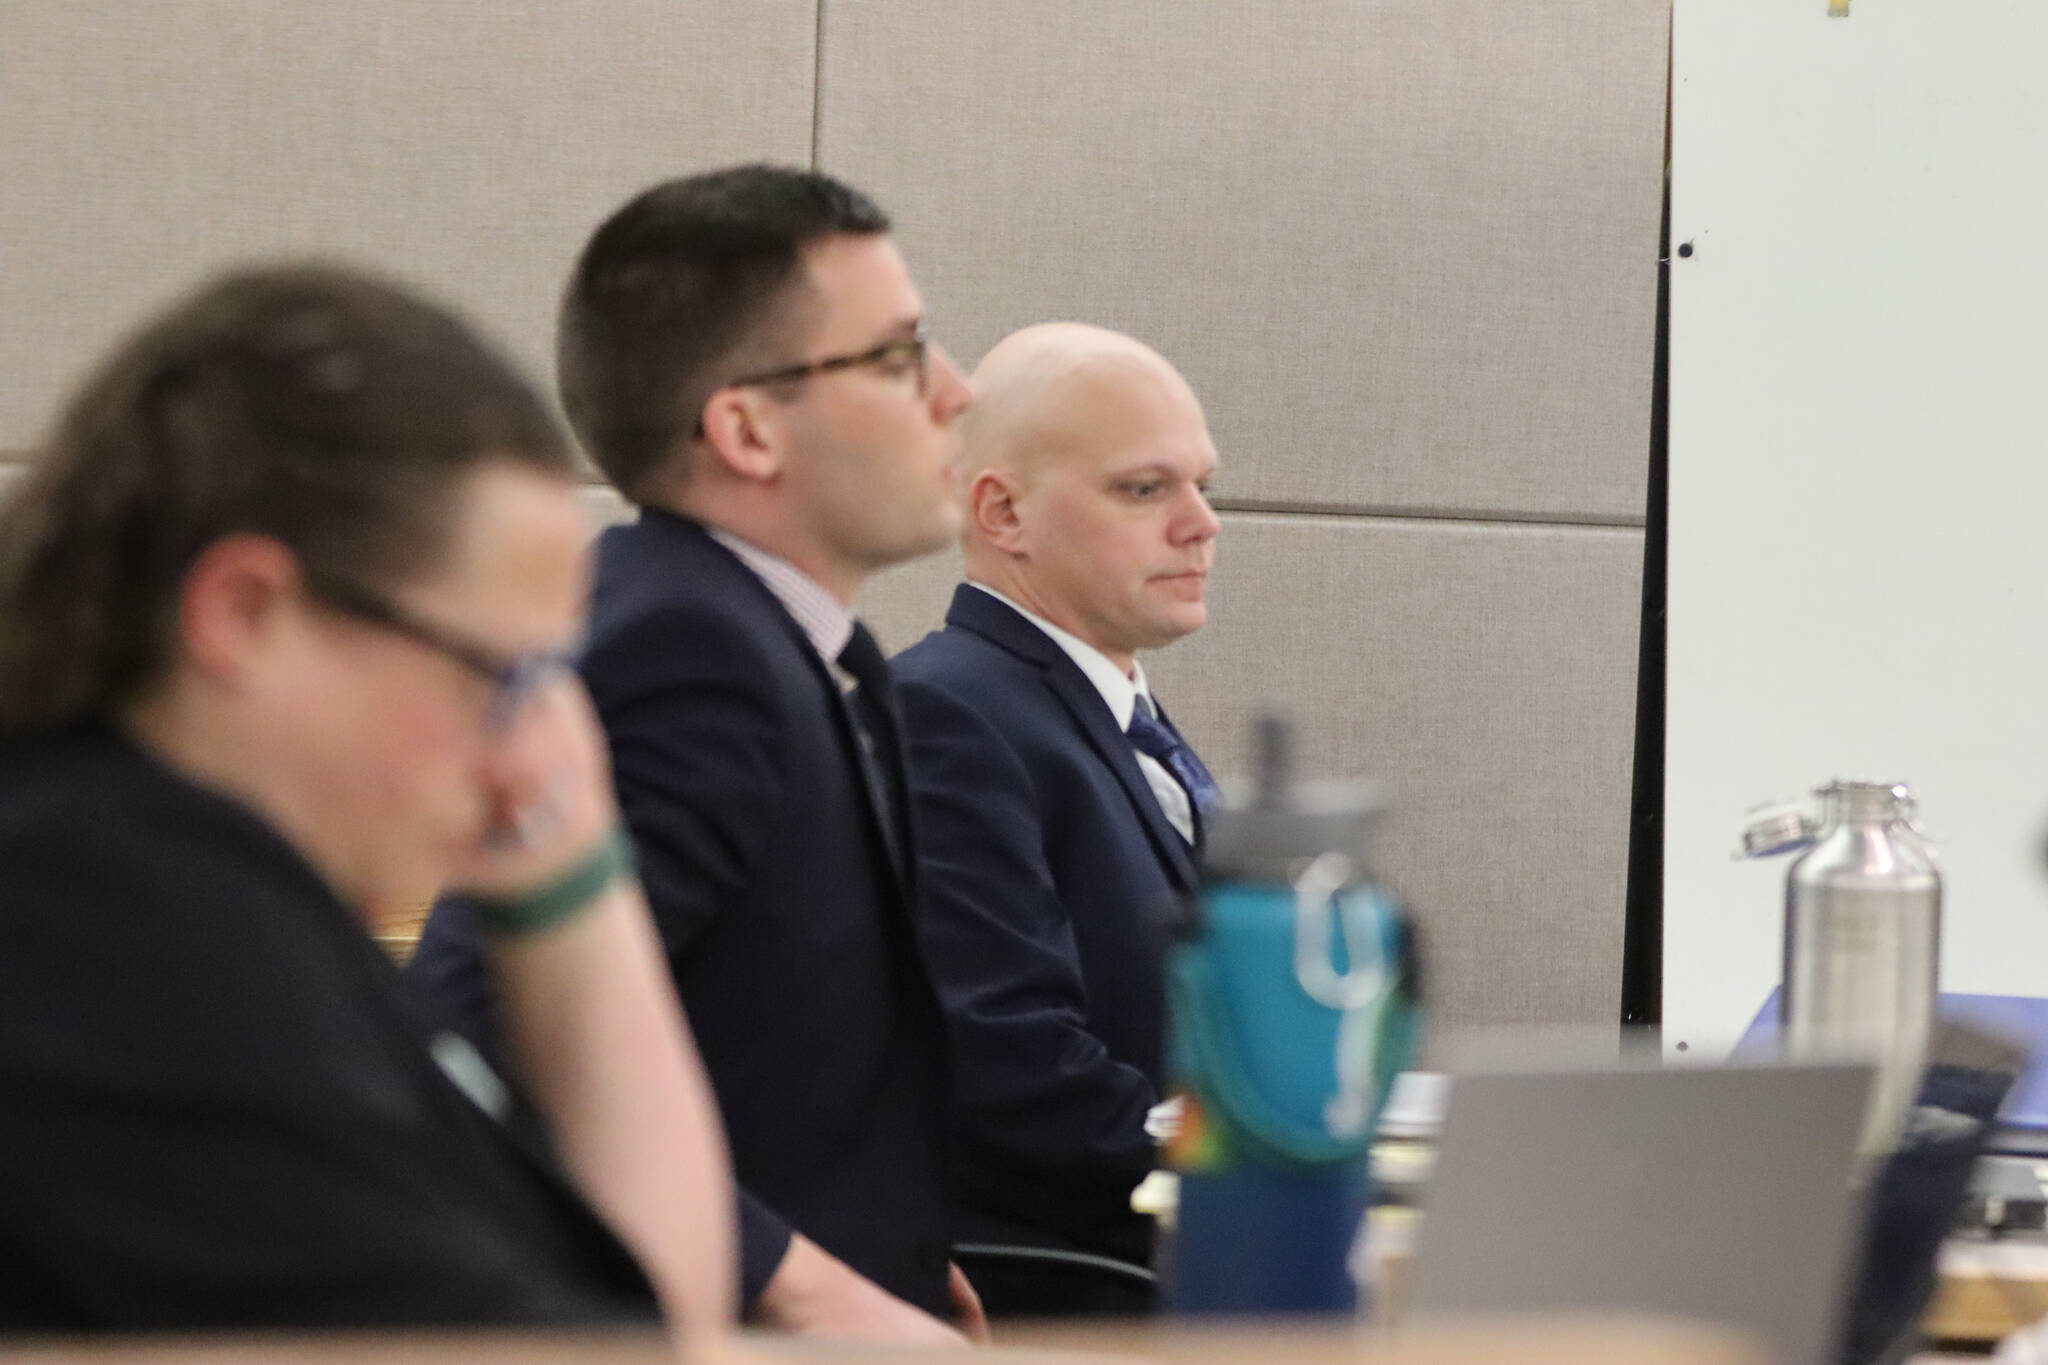 Jason Traver, sitting furtherest away, with defense attorney Nicholas Ambrose and state prosecuting attorney Jessalyn Gillum, awaits the jury’s verdict on Friday after a week’s long trial concluded. For a case that initially had started in 2019, Traver was ultimately found not guilty of second-degree assault against his wife Jennifer Traver. (Jonson Kuhn / Juneau Empire)